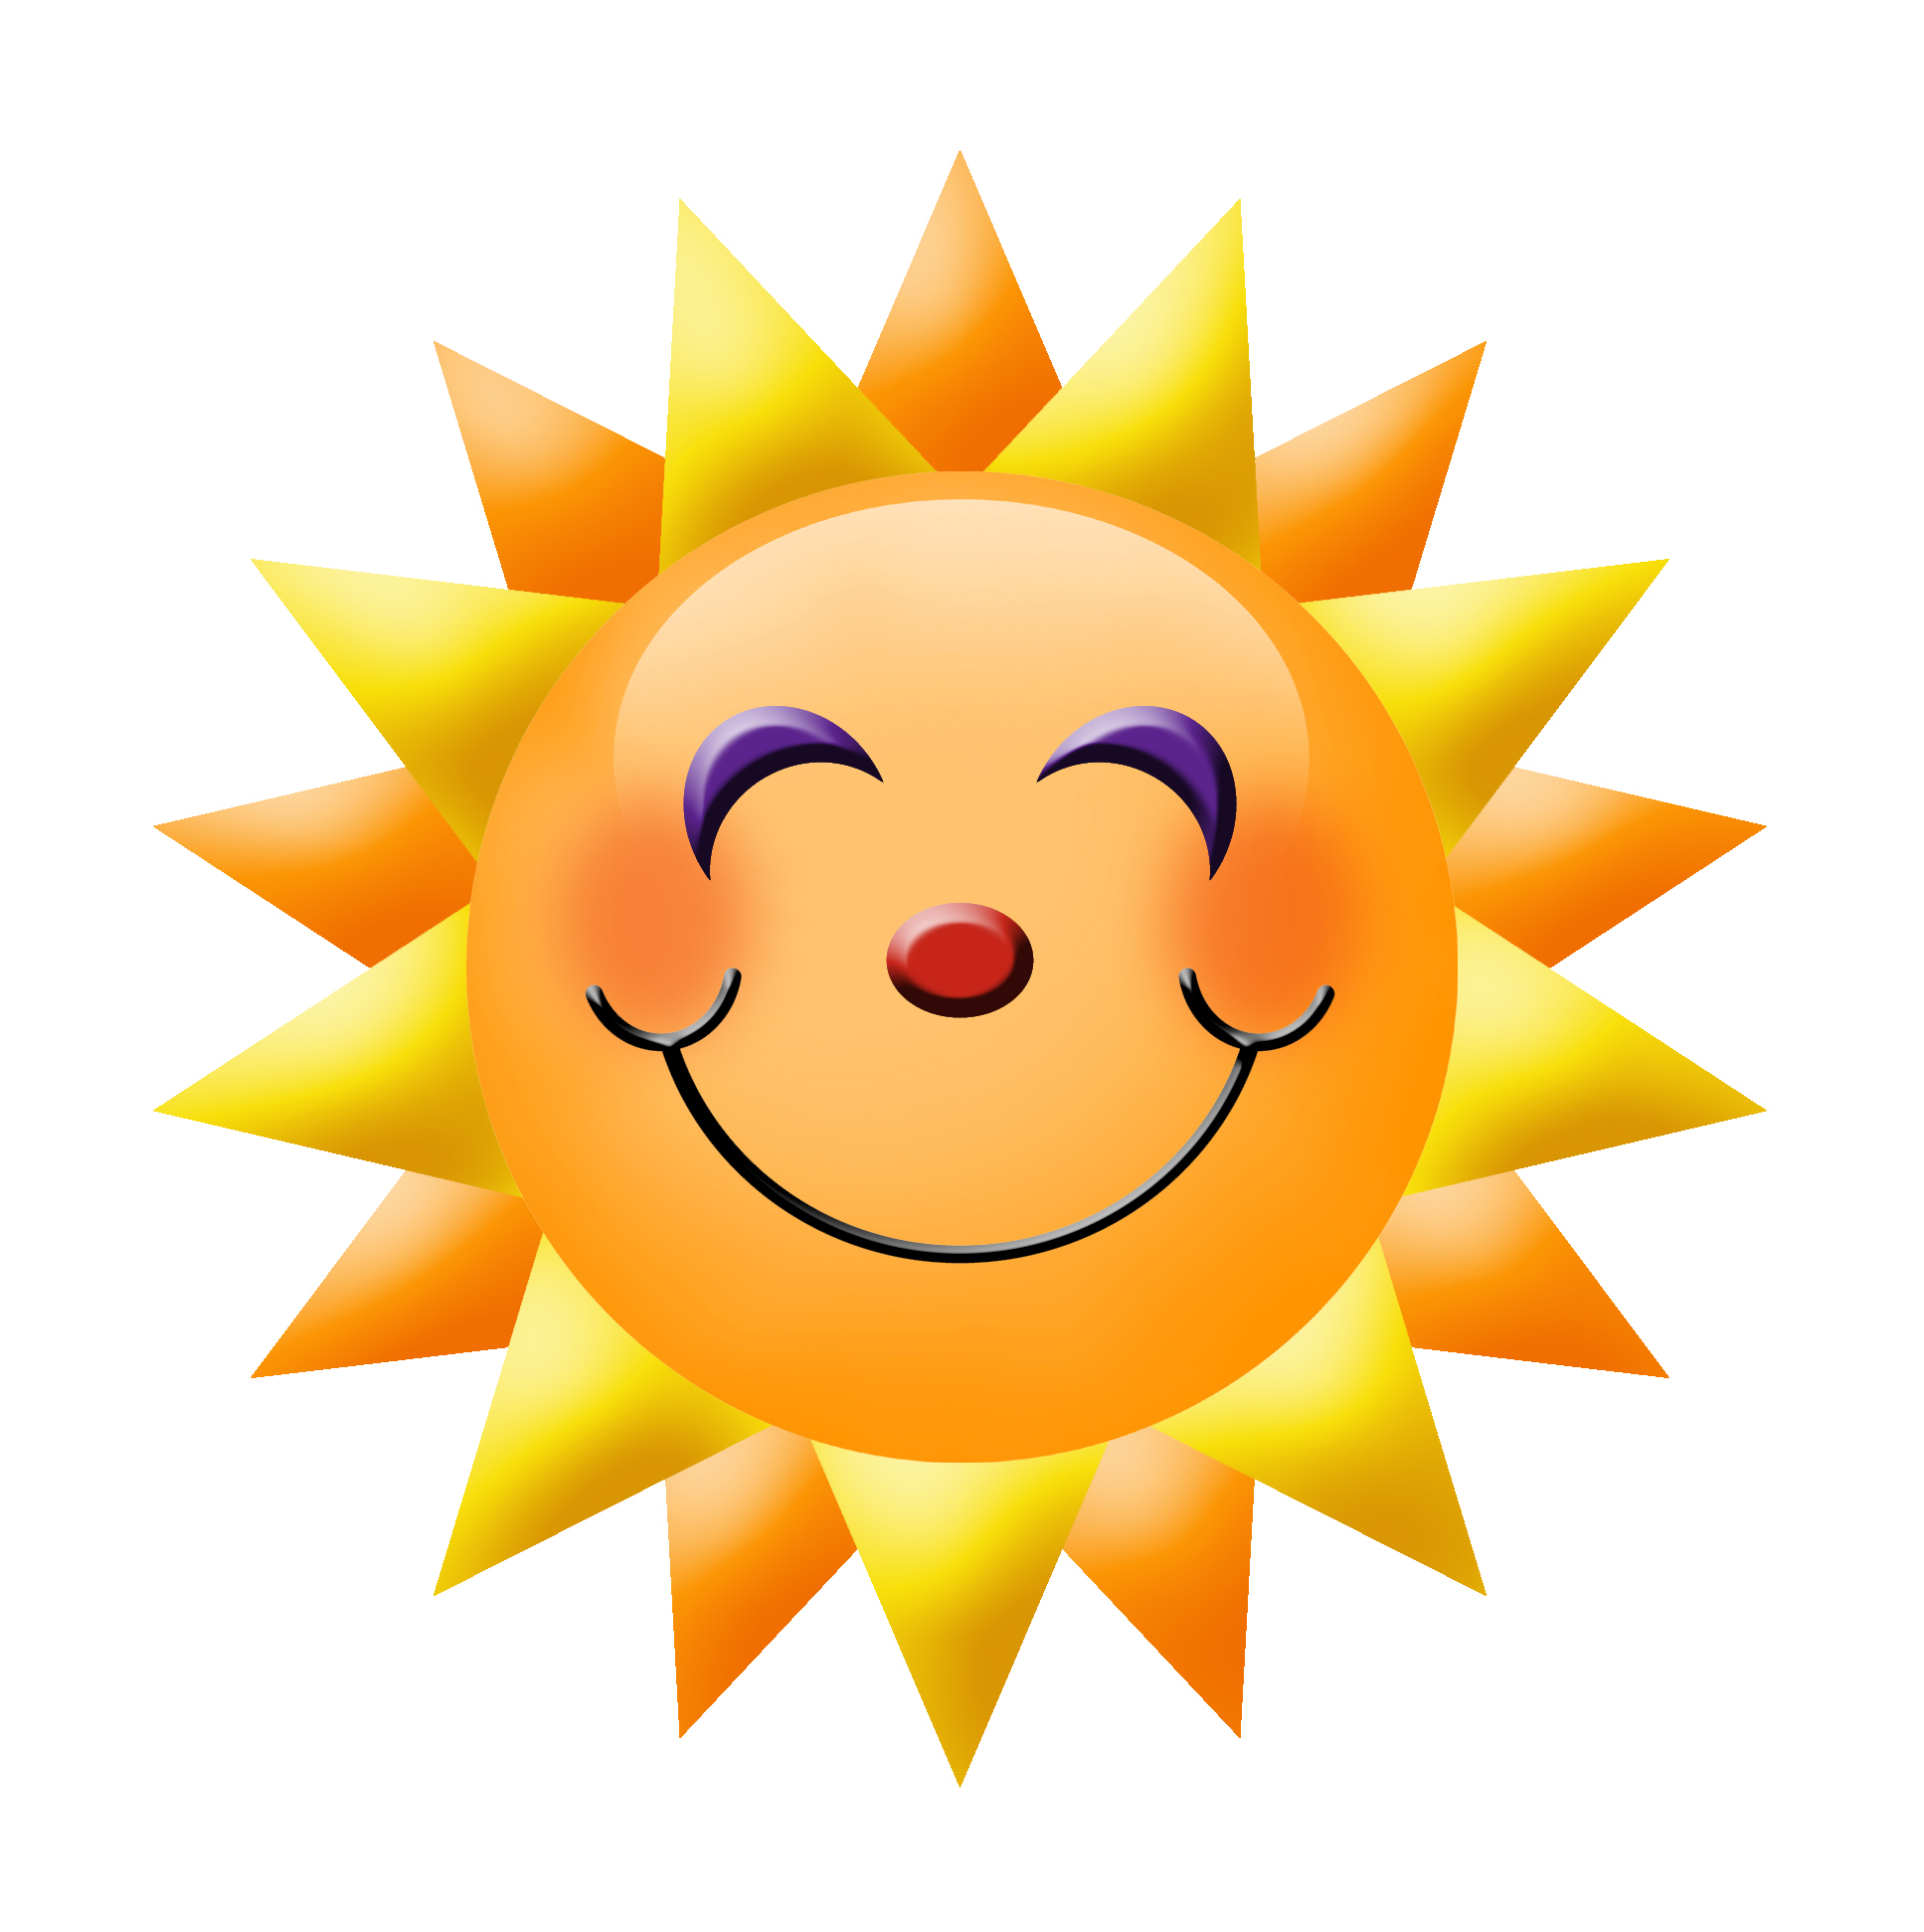 Animated Smiling Sun - ClipArt Best